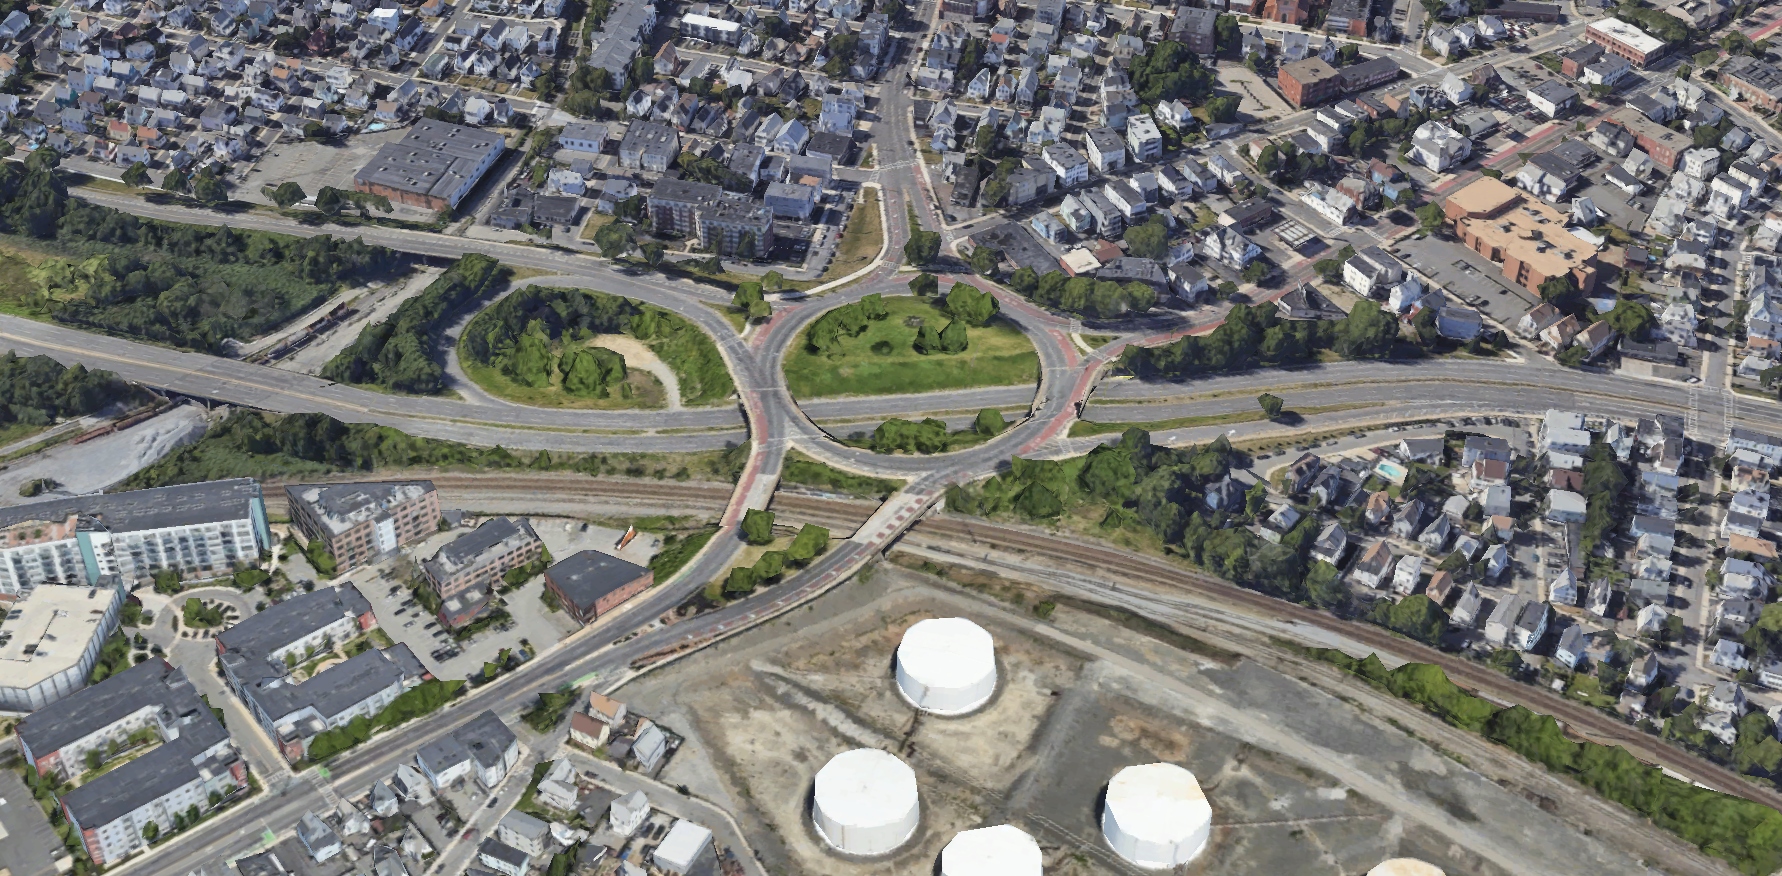 An aerial view of a large traffic rotary on a major highway that runs left-right through the center of the image. On the bottom edge are several large oil tanks and some railroad tracks. On the upper half of the image are densely-populated residential and commercial neighborhoods.